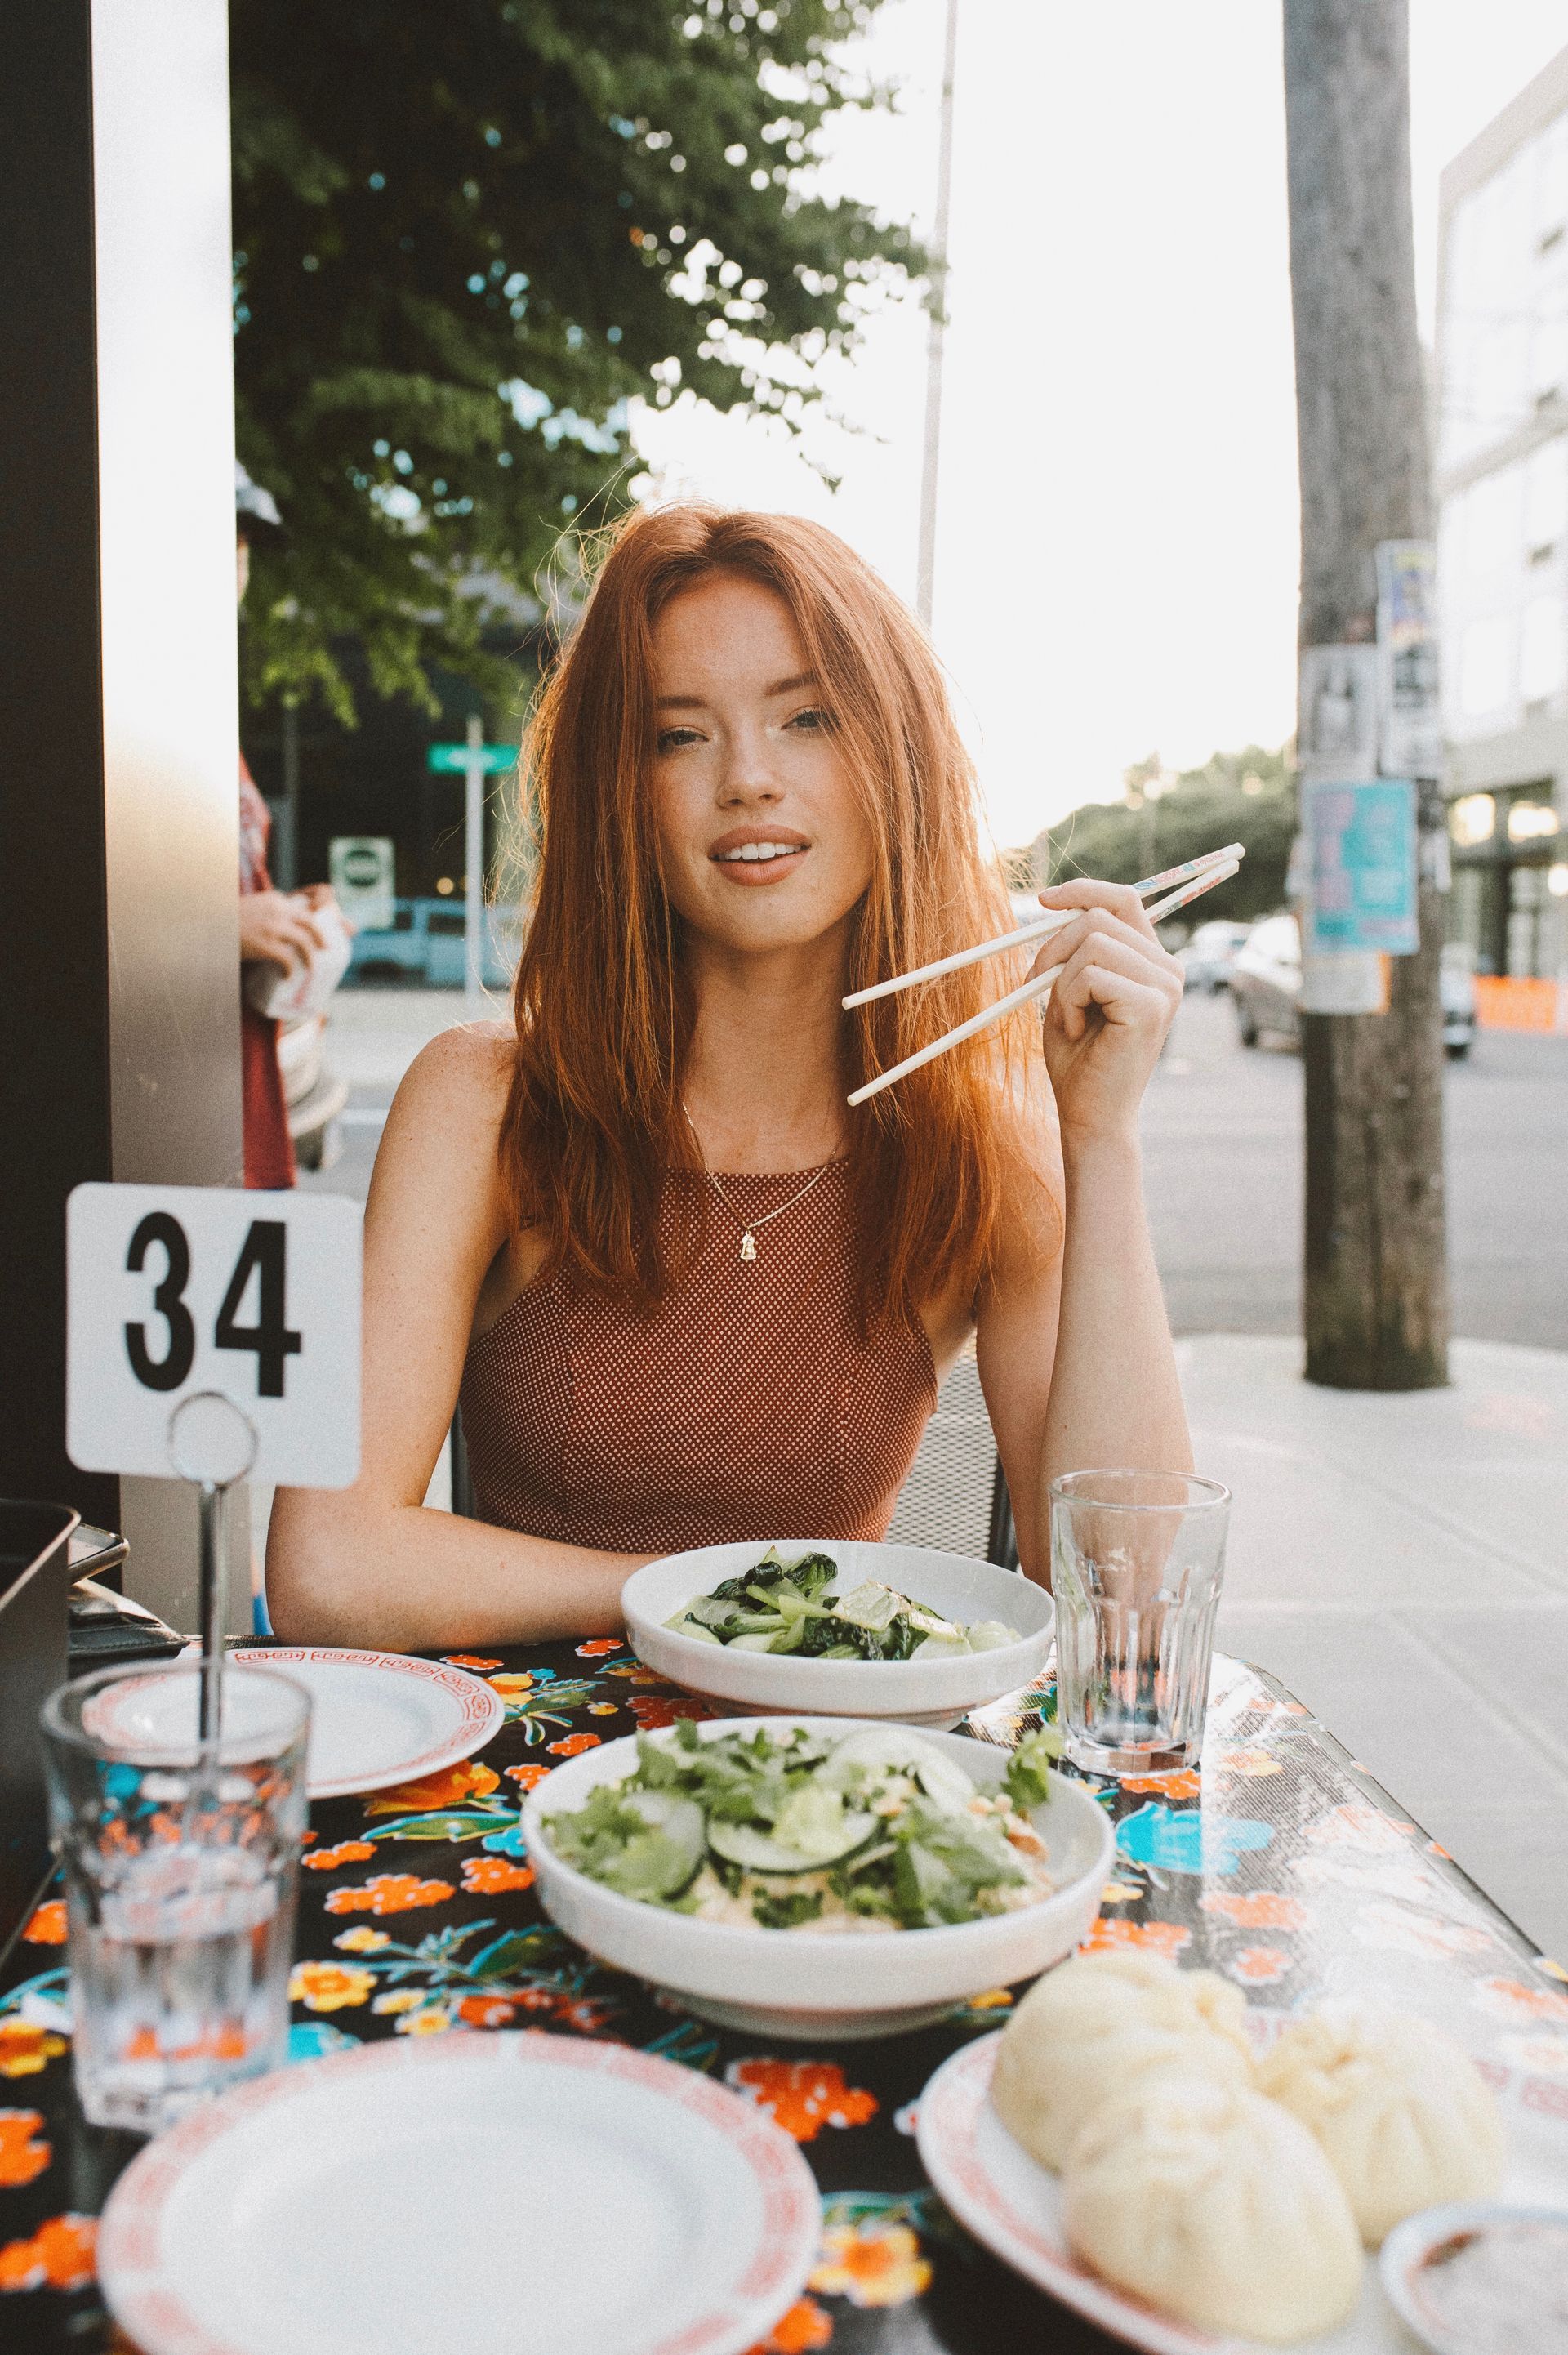 Attractive woman eating a salad. Happy with her photos